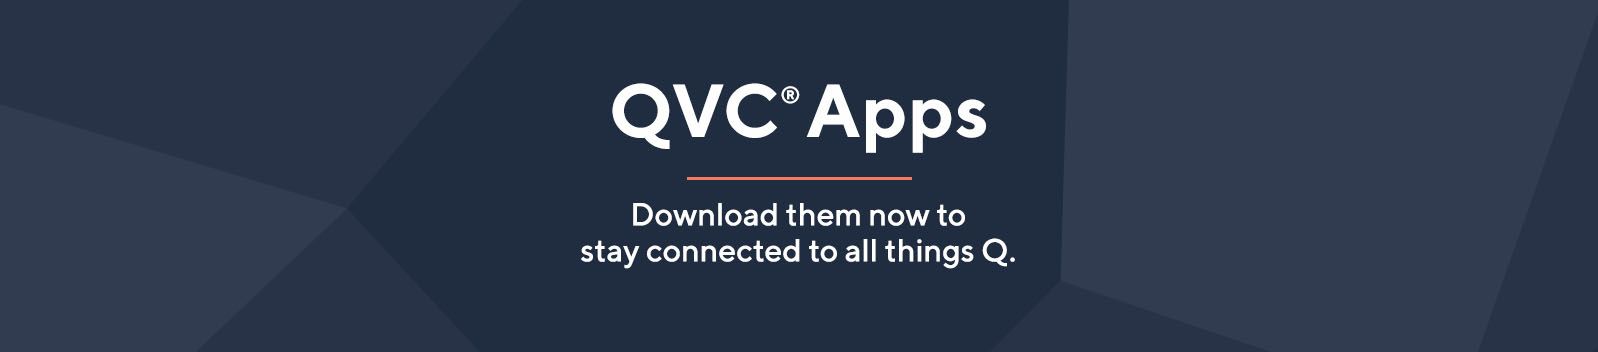 QVC® Apps. Download them now to stay connected to all things Q. 